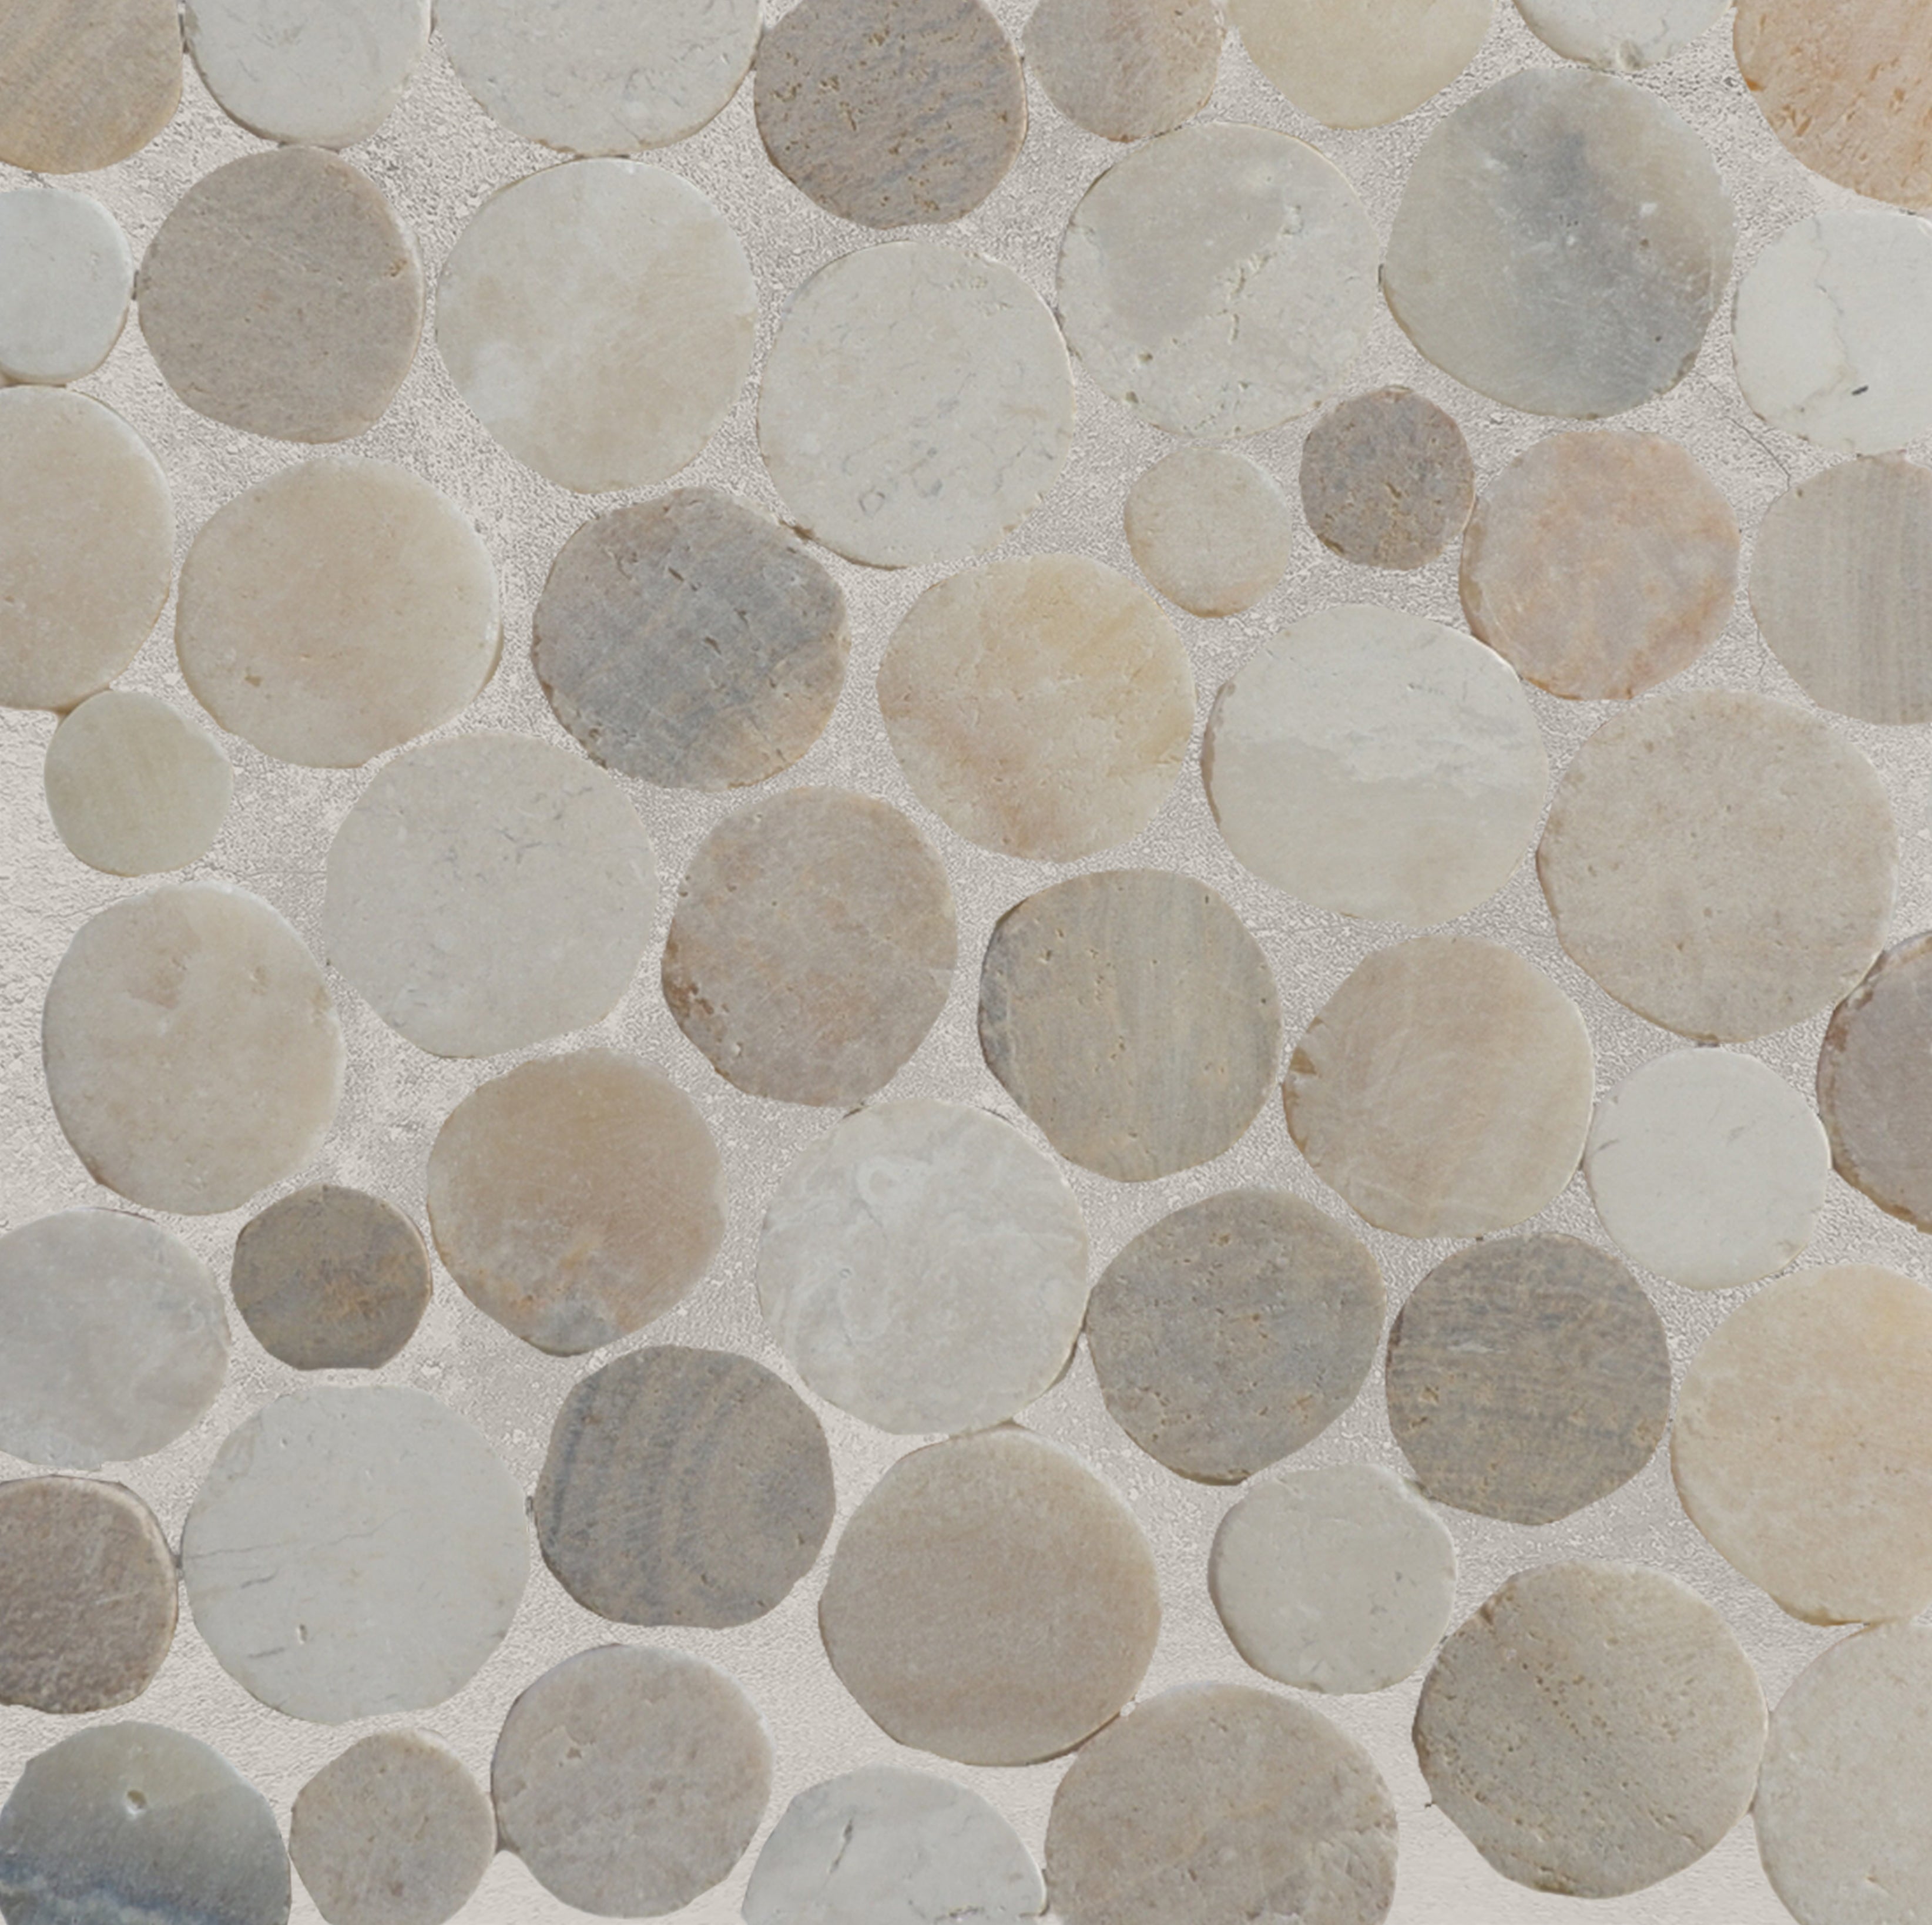 Sunset pebble tile close up sample with grout